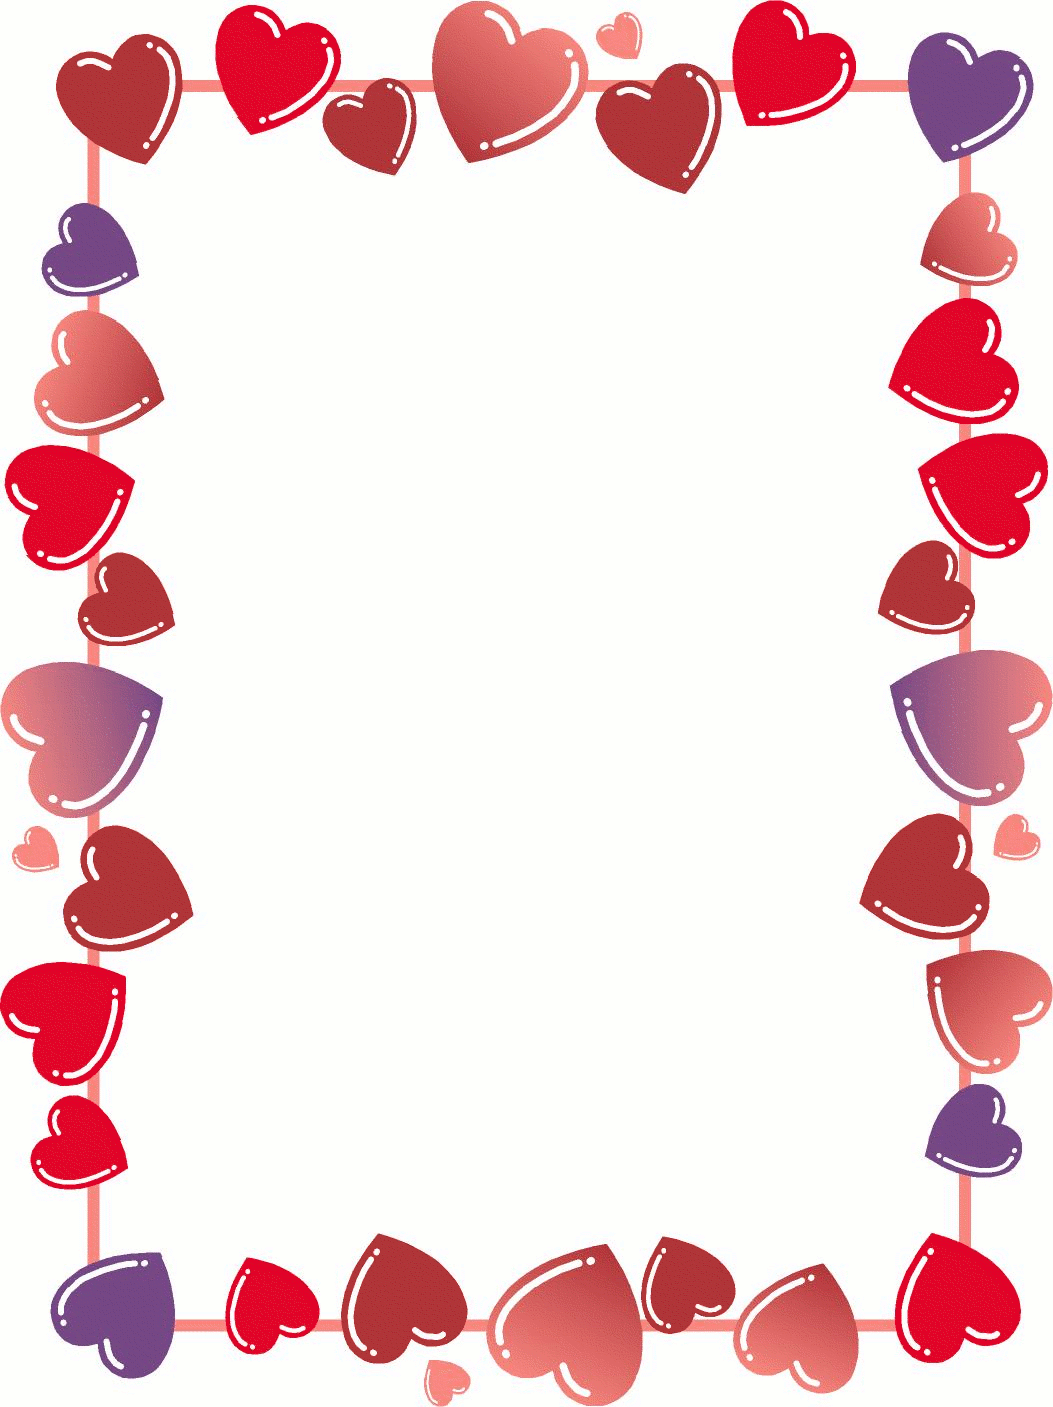 Free Heart Border For Word Download Free Heart Border For Word Png